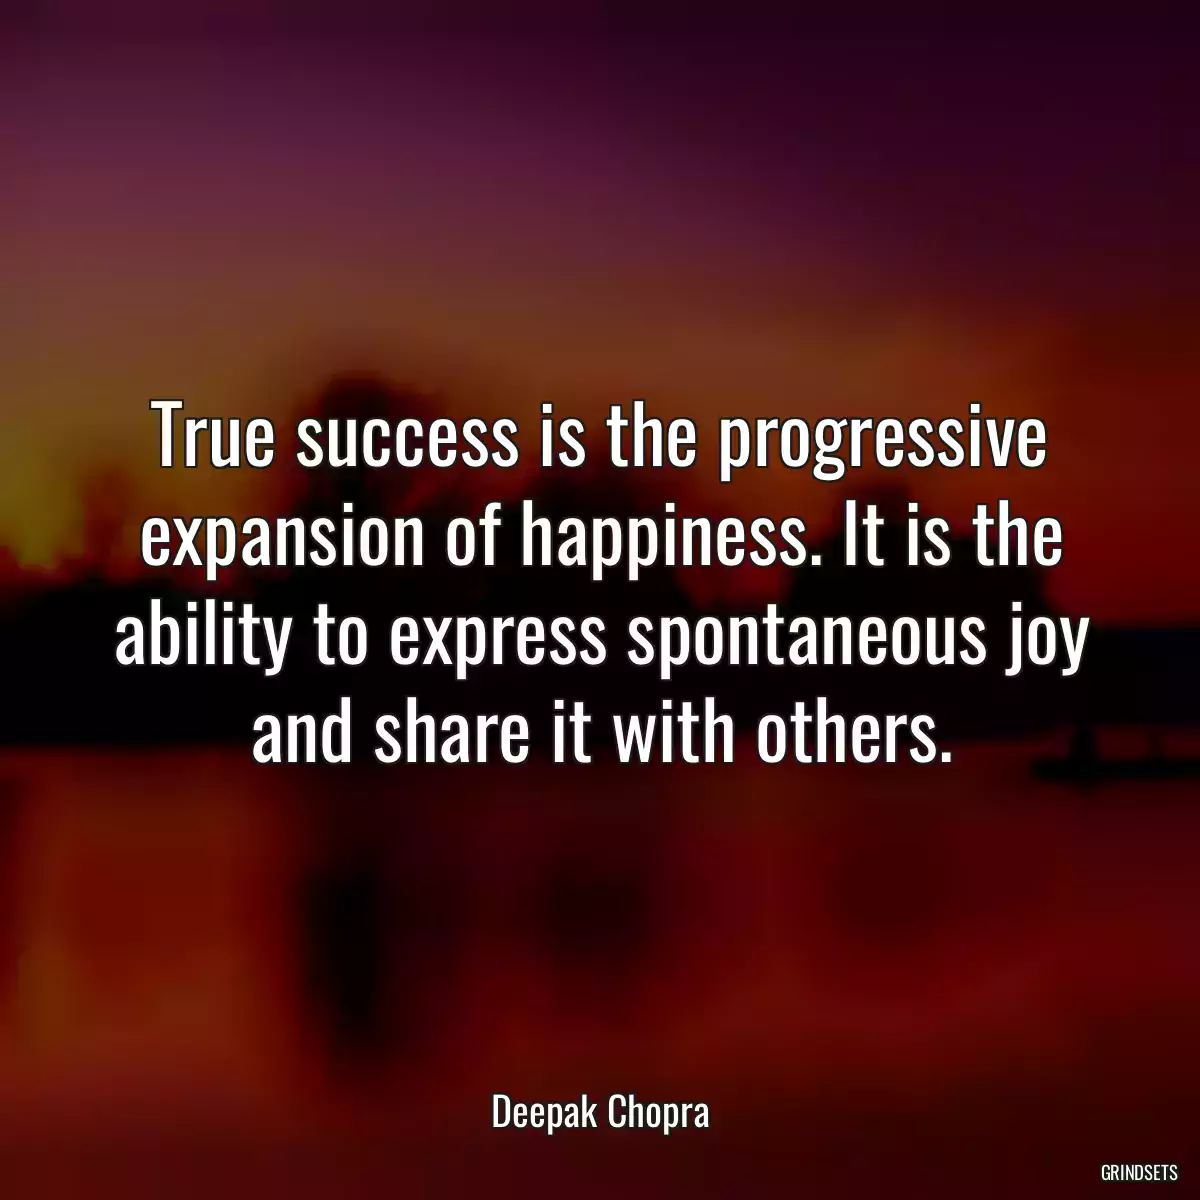 True success is the progressive expansion of happiness. It is the ability to express spontaneous joy and share it with others.